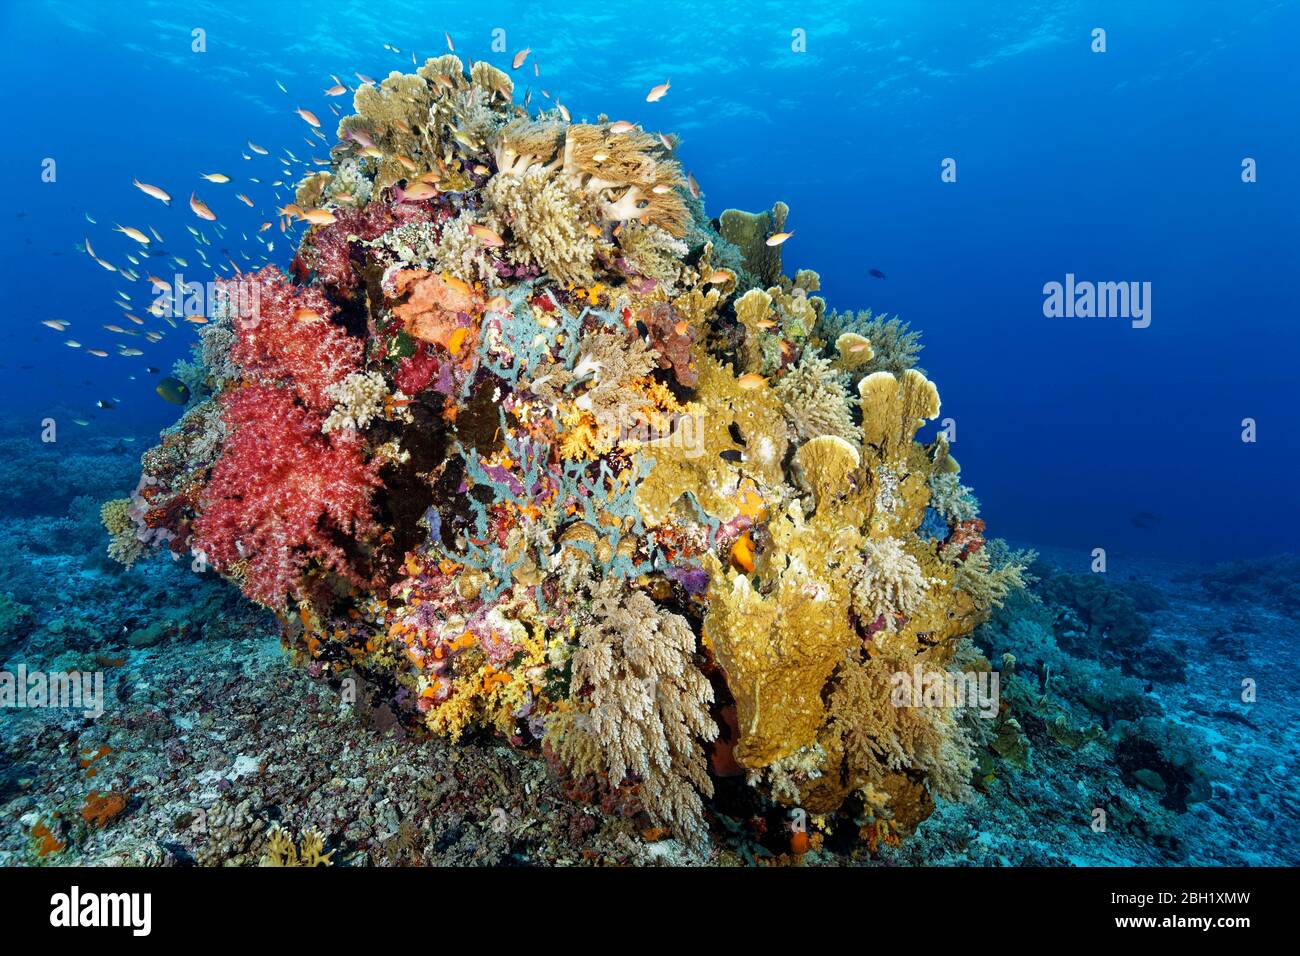 Large coral block on reef top densely covered with soft coral (Octocorallia), hard coral (Hexacorallia) and Sponge (Porifera), Pacific, Sulu Sea Stock Photo